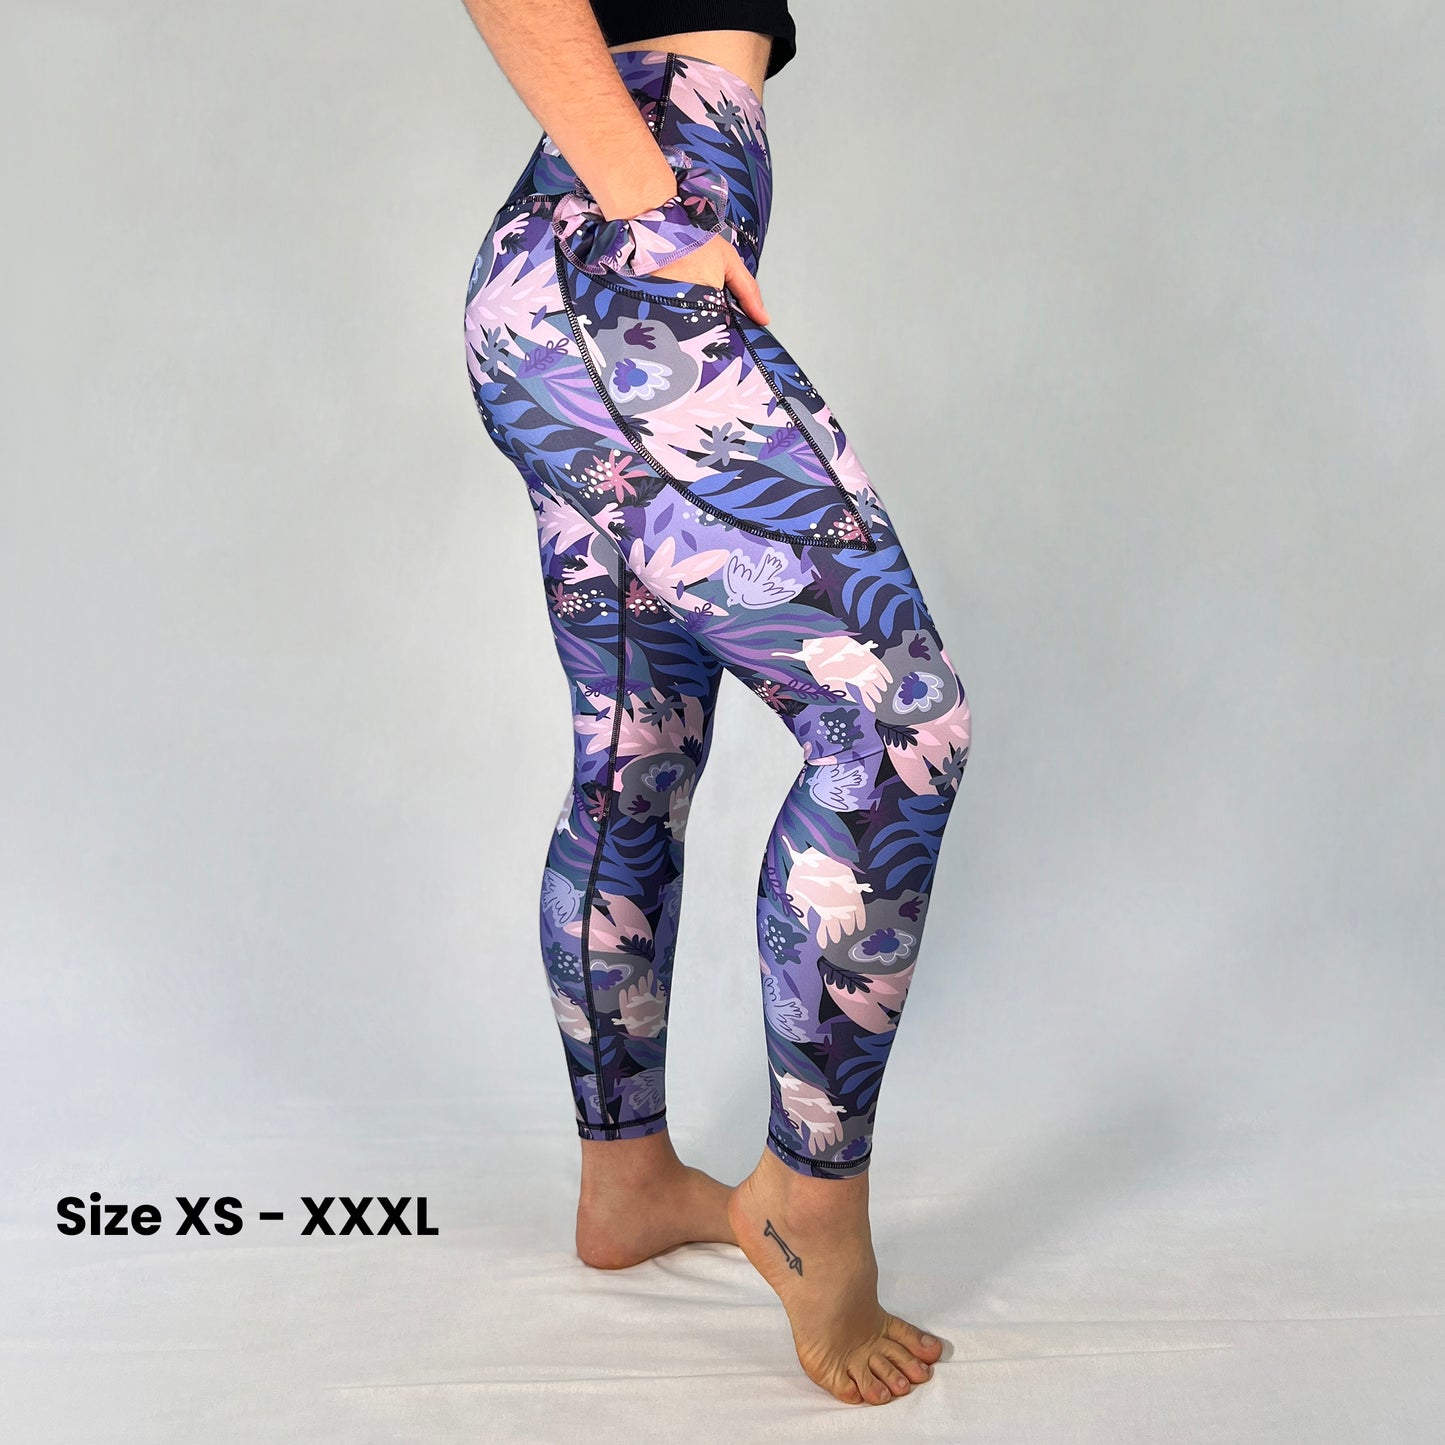 Side view of full-length leggings with pocket in Paloma design by Art2Go Monique Baques